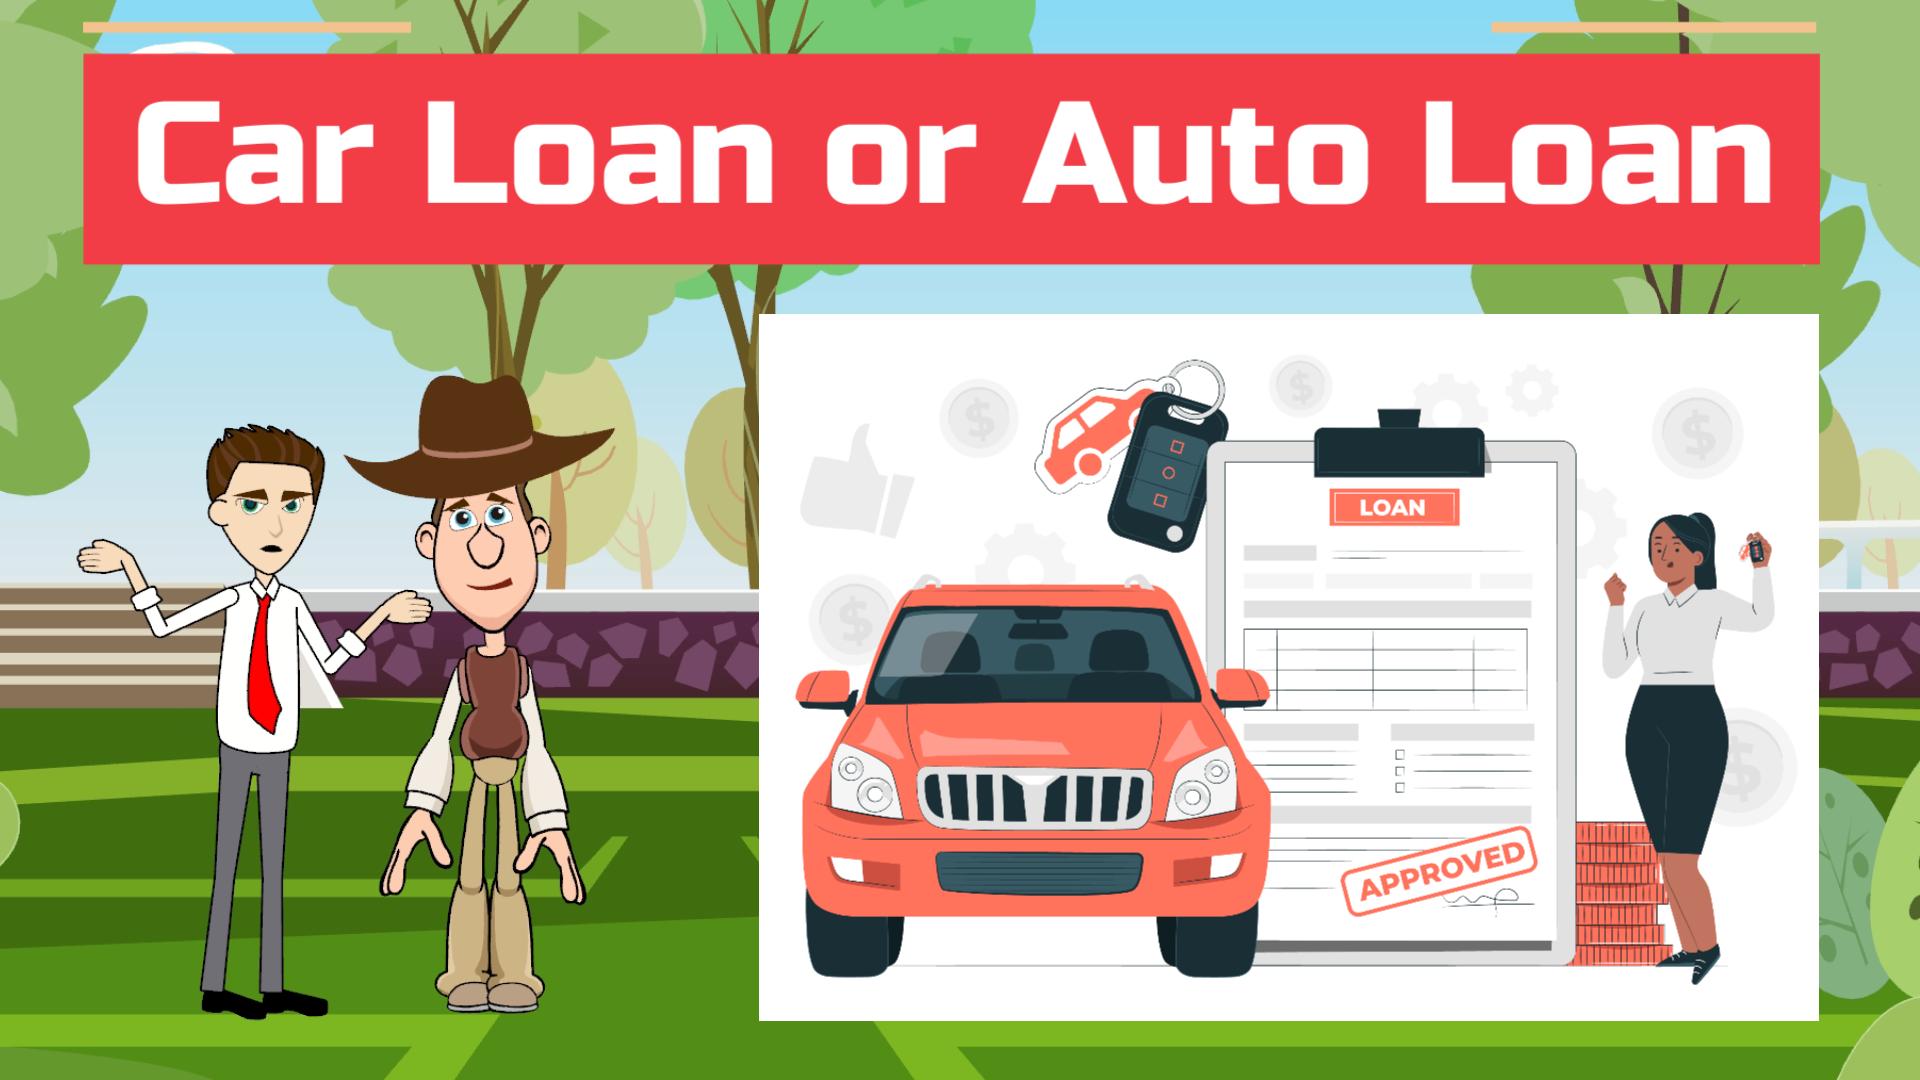 What is a Car Loan or Auto Loan